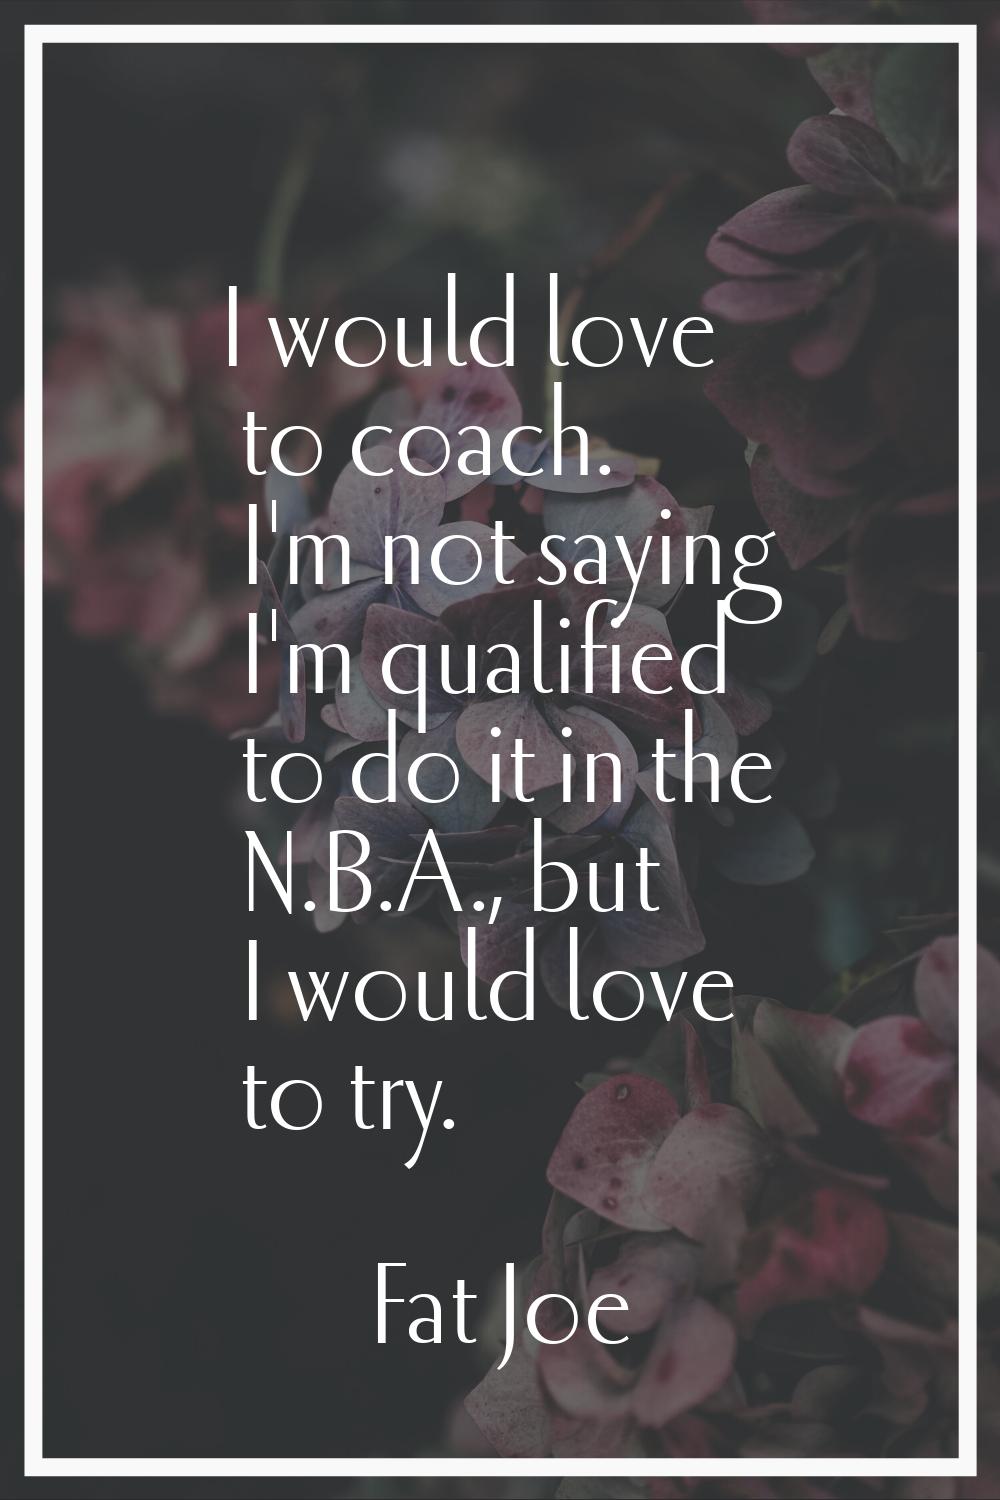 I would love to coach. I'm not saying I'm qualified to do it in the N.B.A., but I would love to try